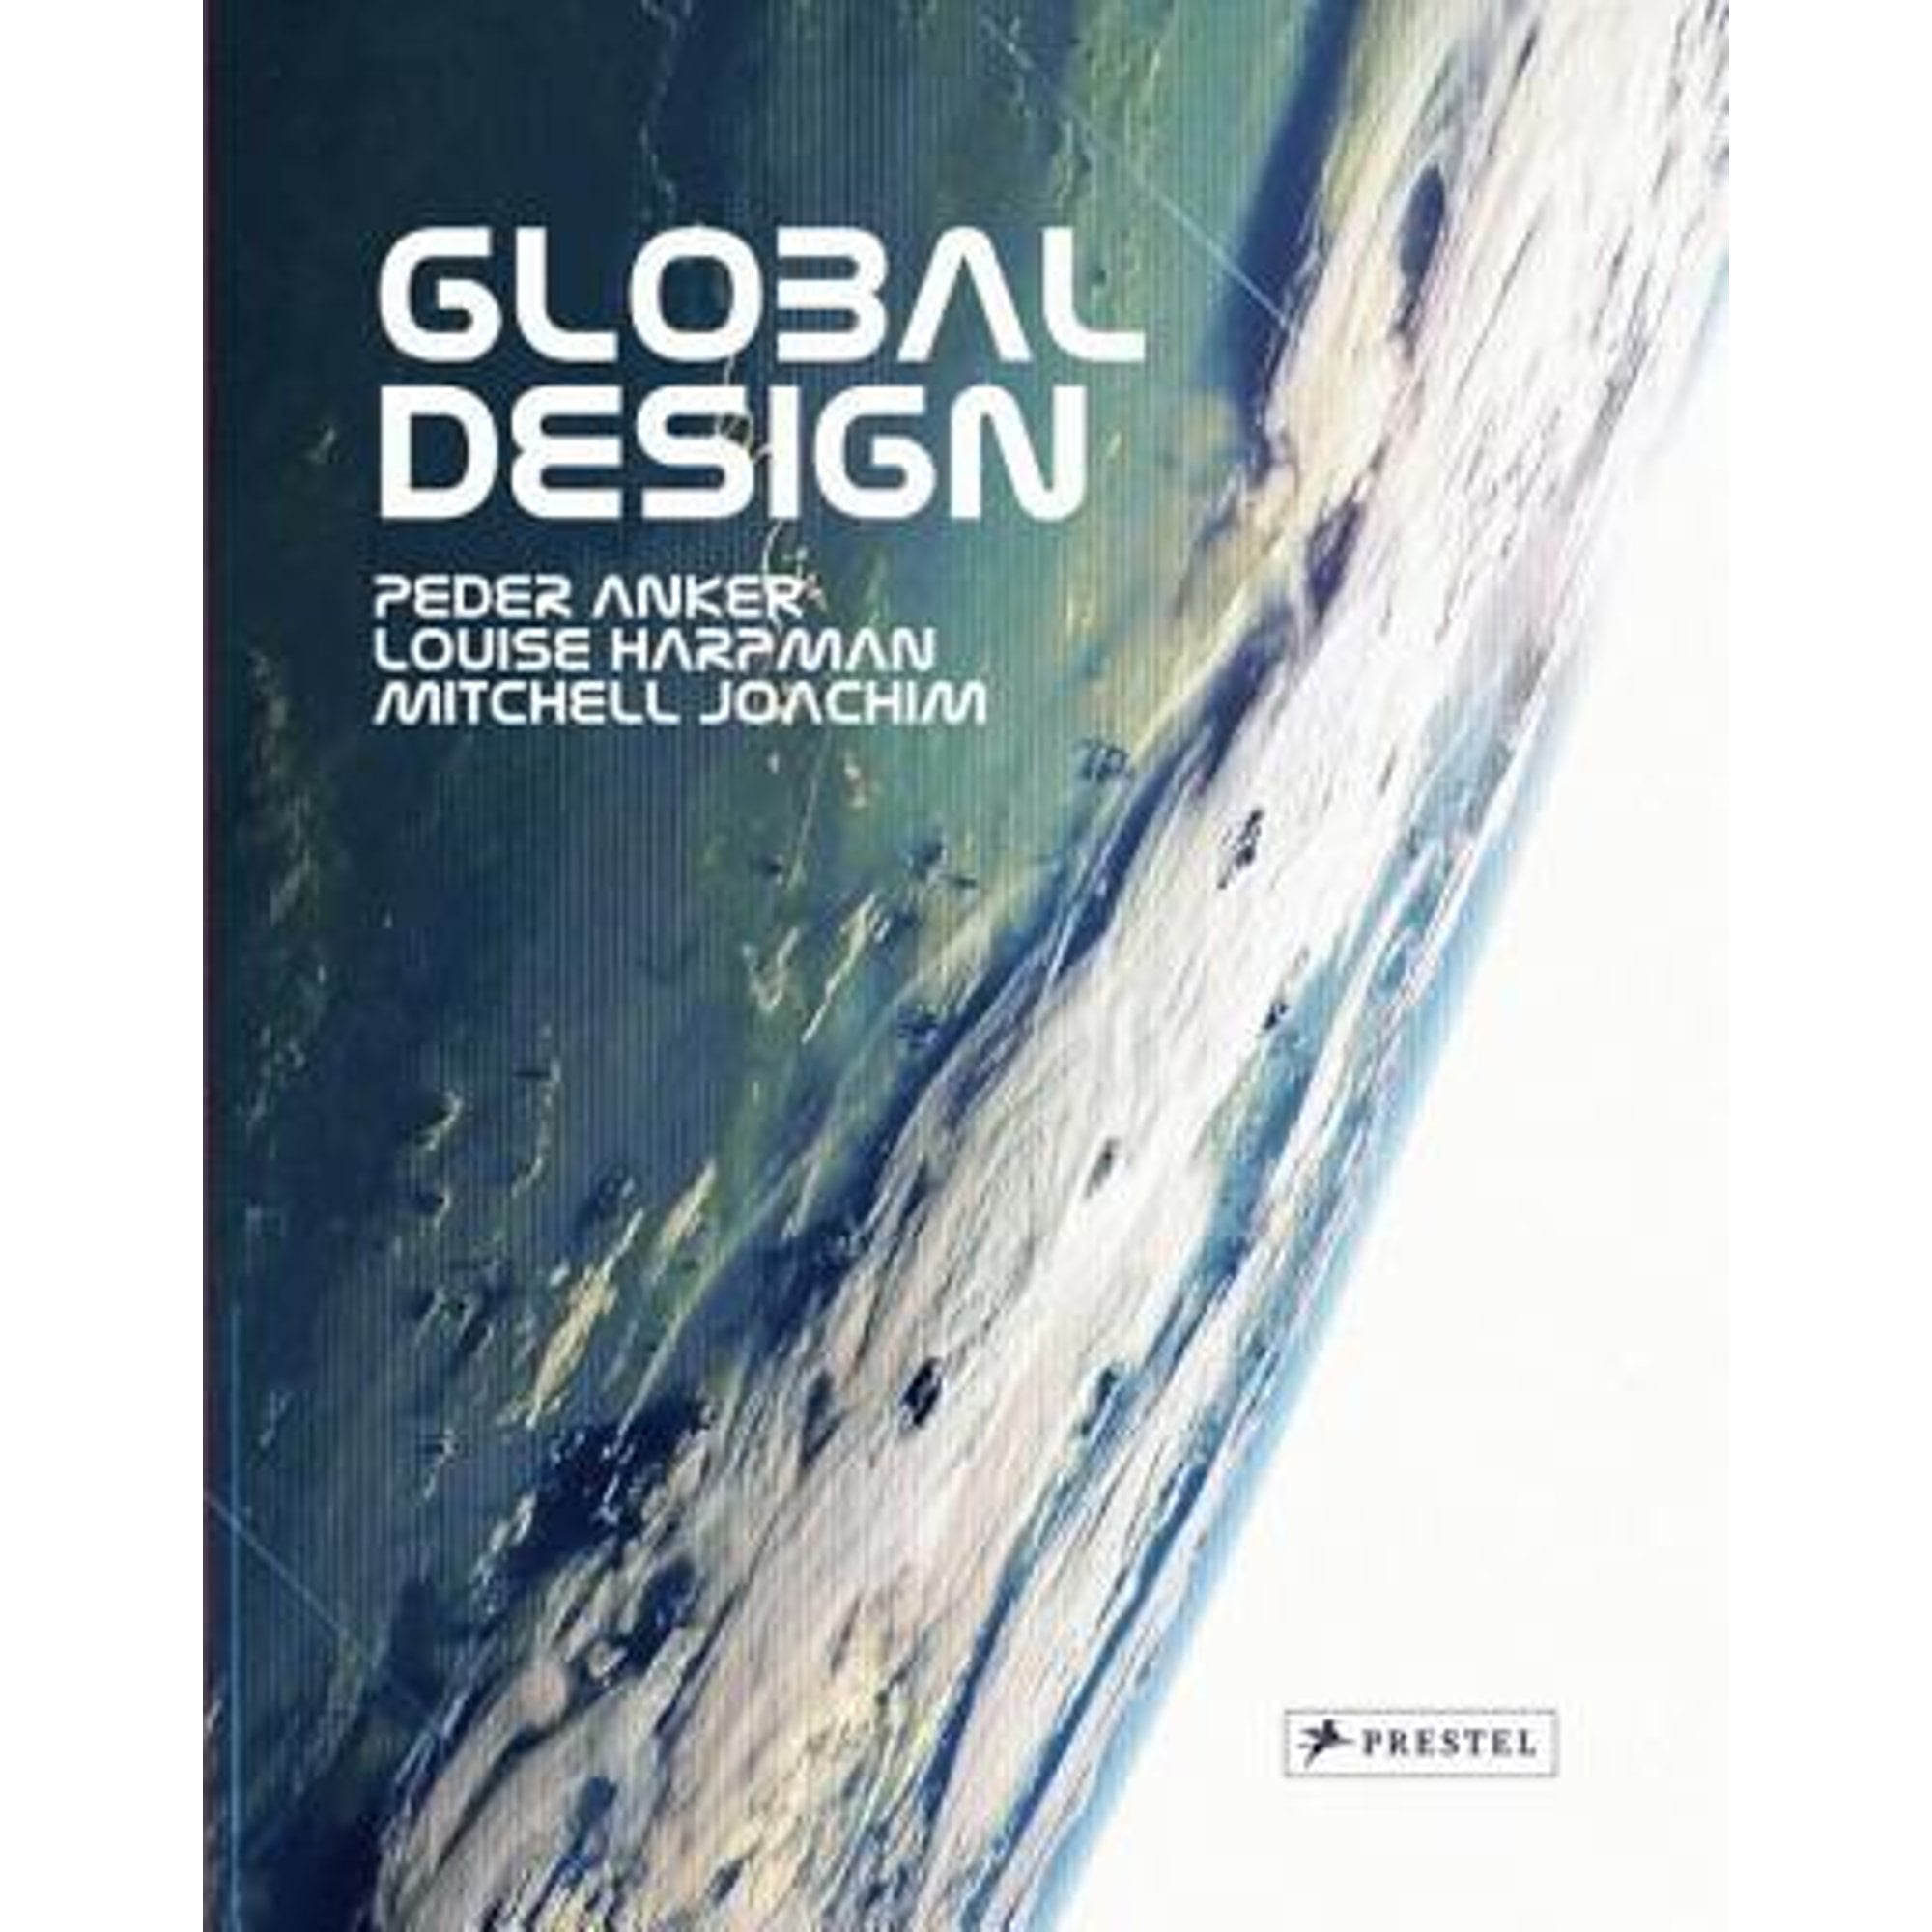 Global (Pre-Owned Hardcover by Peder Anker, Louise Harpman, Mitchell Walmart.com